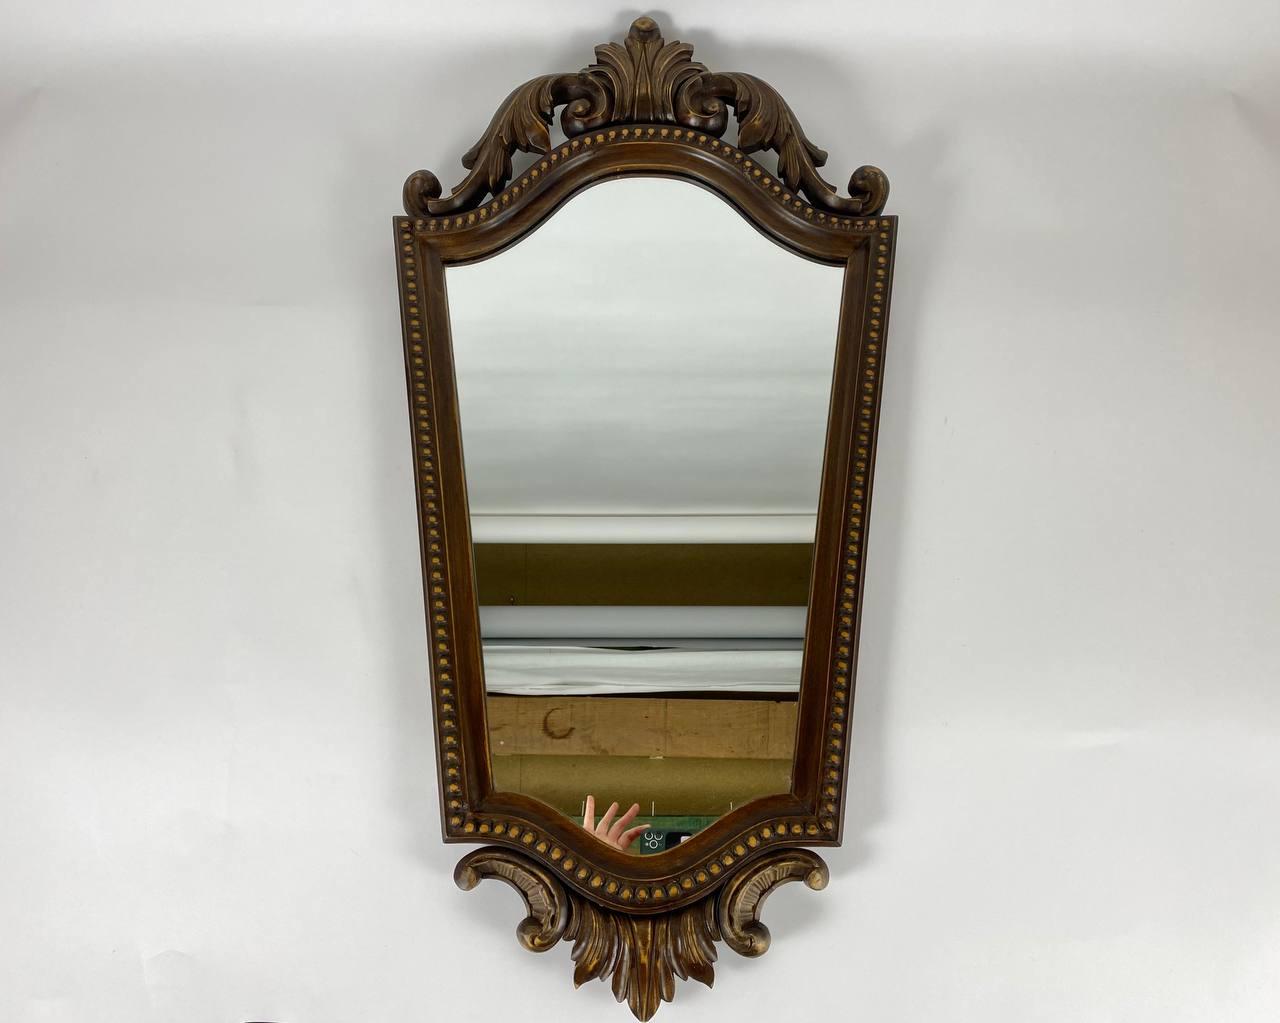 Empire Style vintage wall mirror in a beautiful wooden frame. Belgium.

A mirror is an important accessory for any room. This model has a luxurious design that will add individuality to the interior. 

Echoing the refined palatial style of the